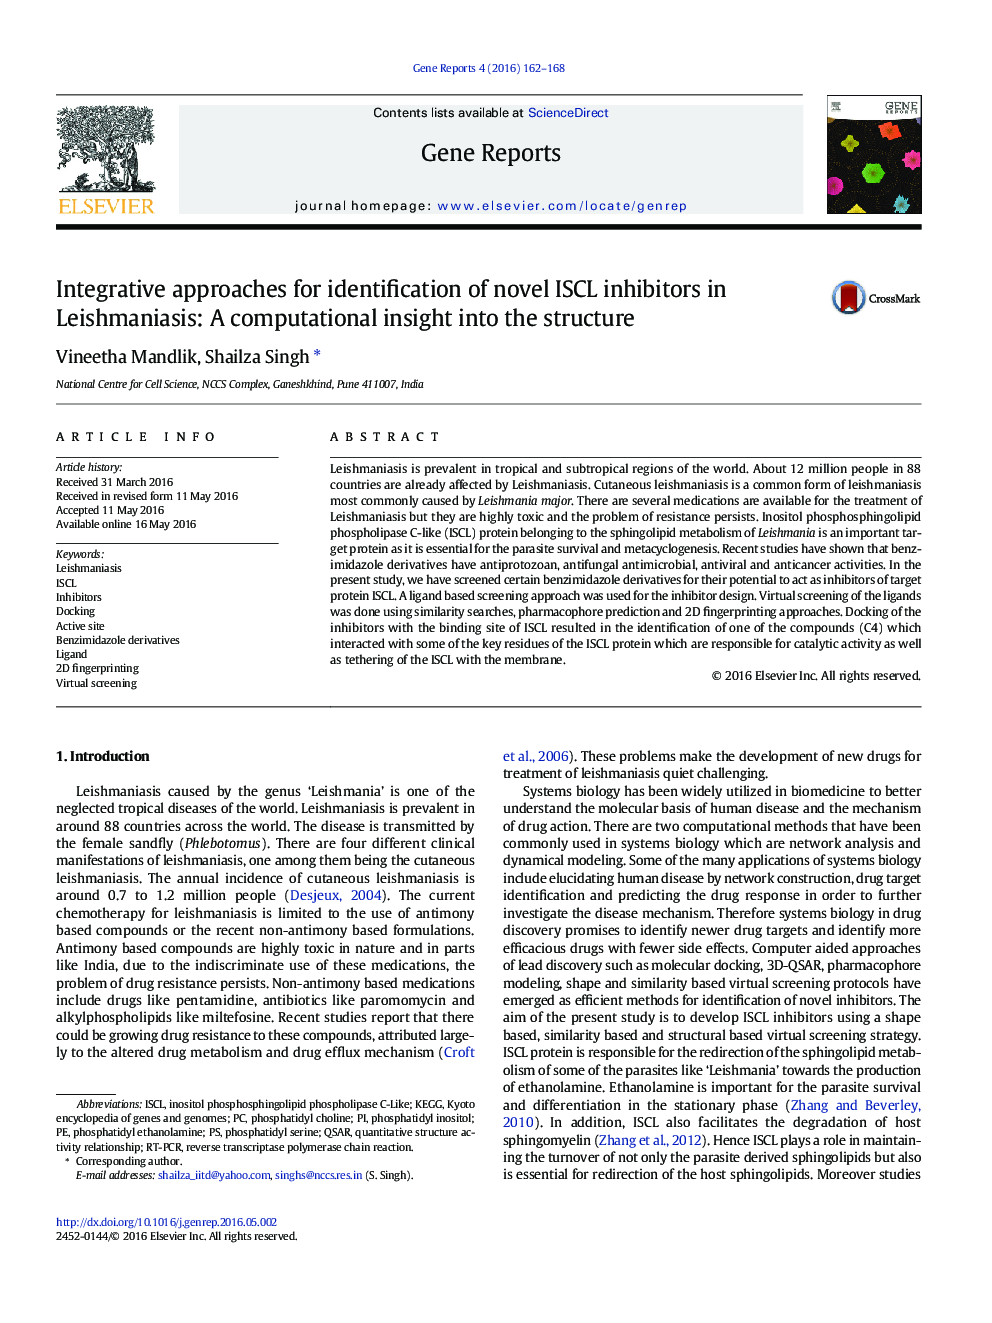 Integrative approaches for identification of novel ISCL inhibitors in Leishmaniasis: A computational insight into the structure